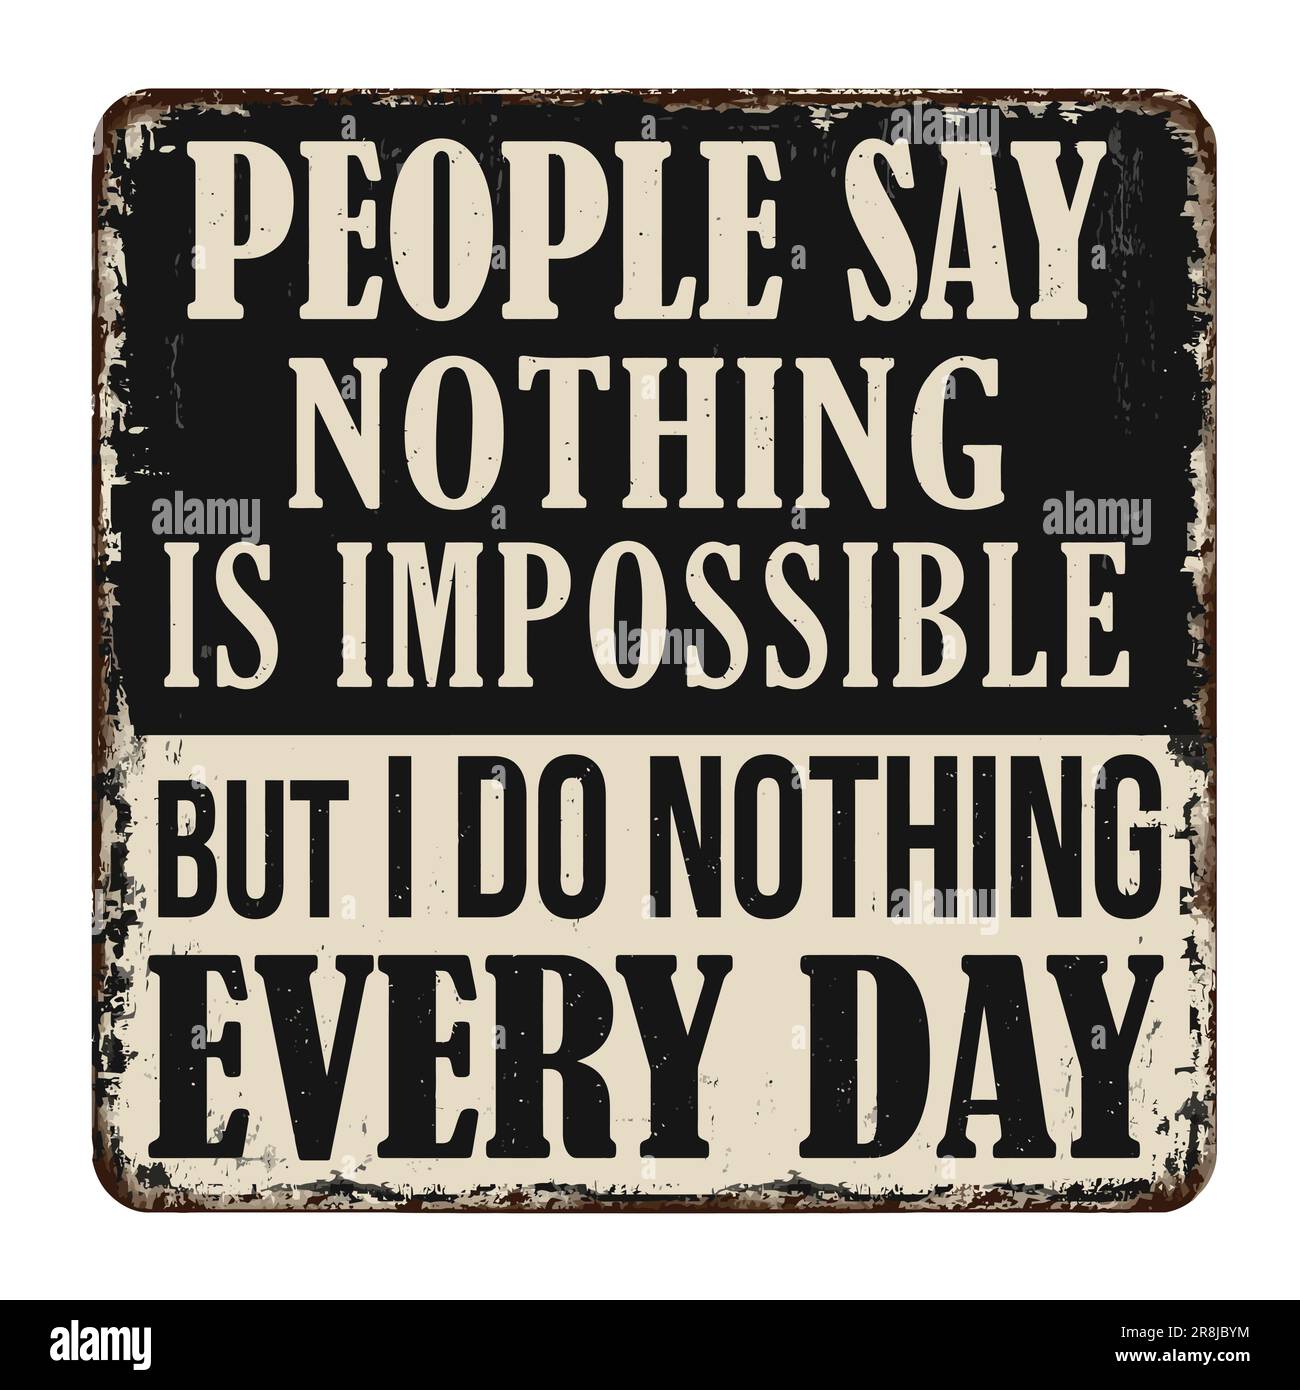 People say nothing is impossible but I do nothing every day vintage rusty metal sign on a white background, vector illustration Stock Vector